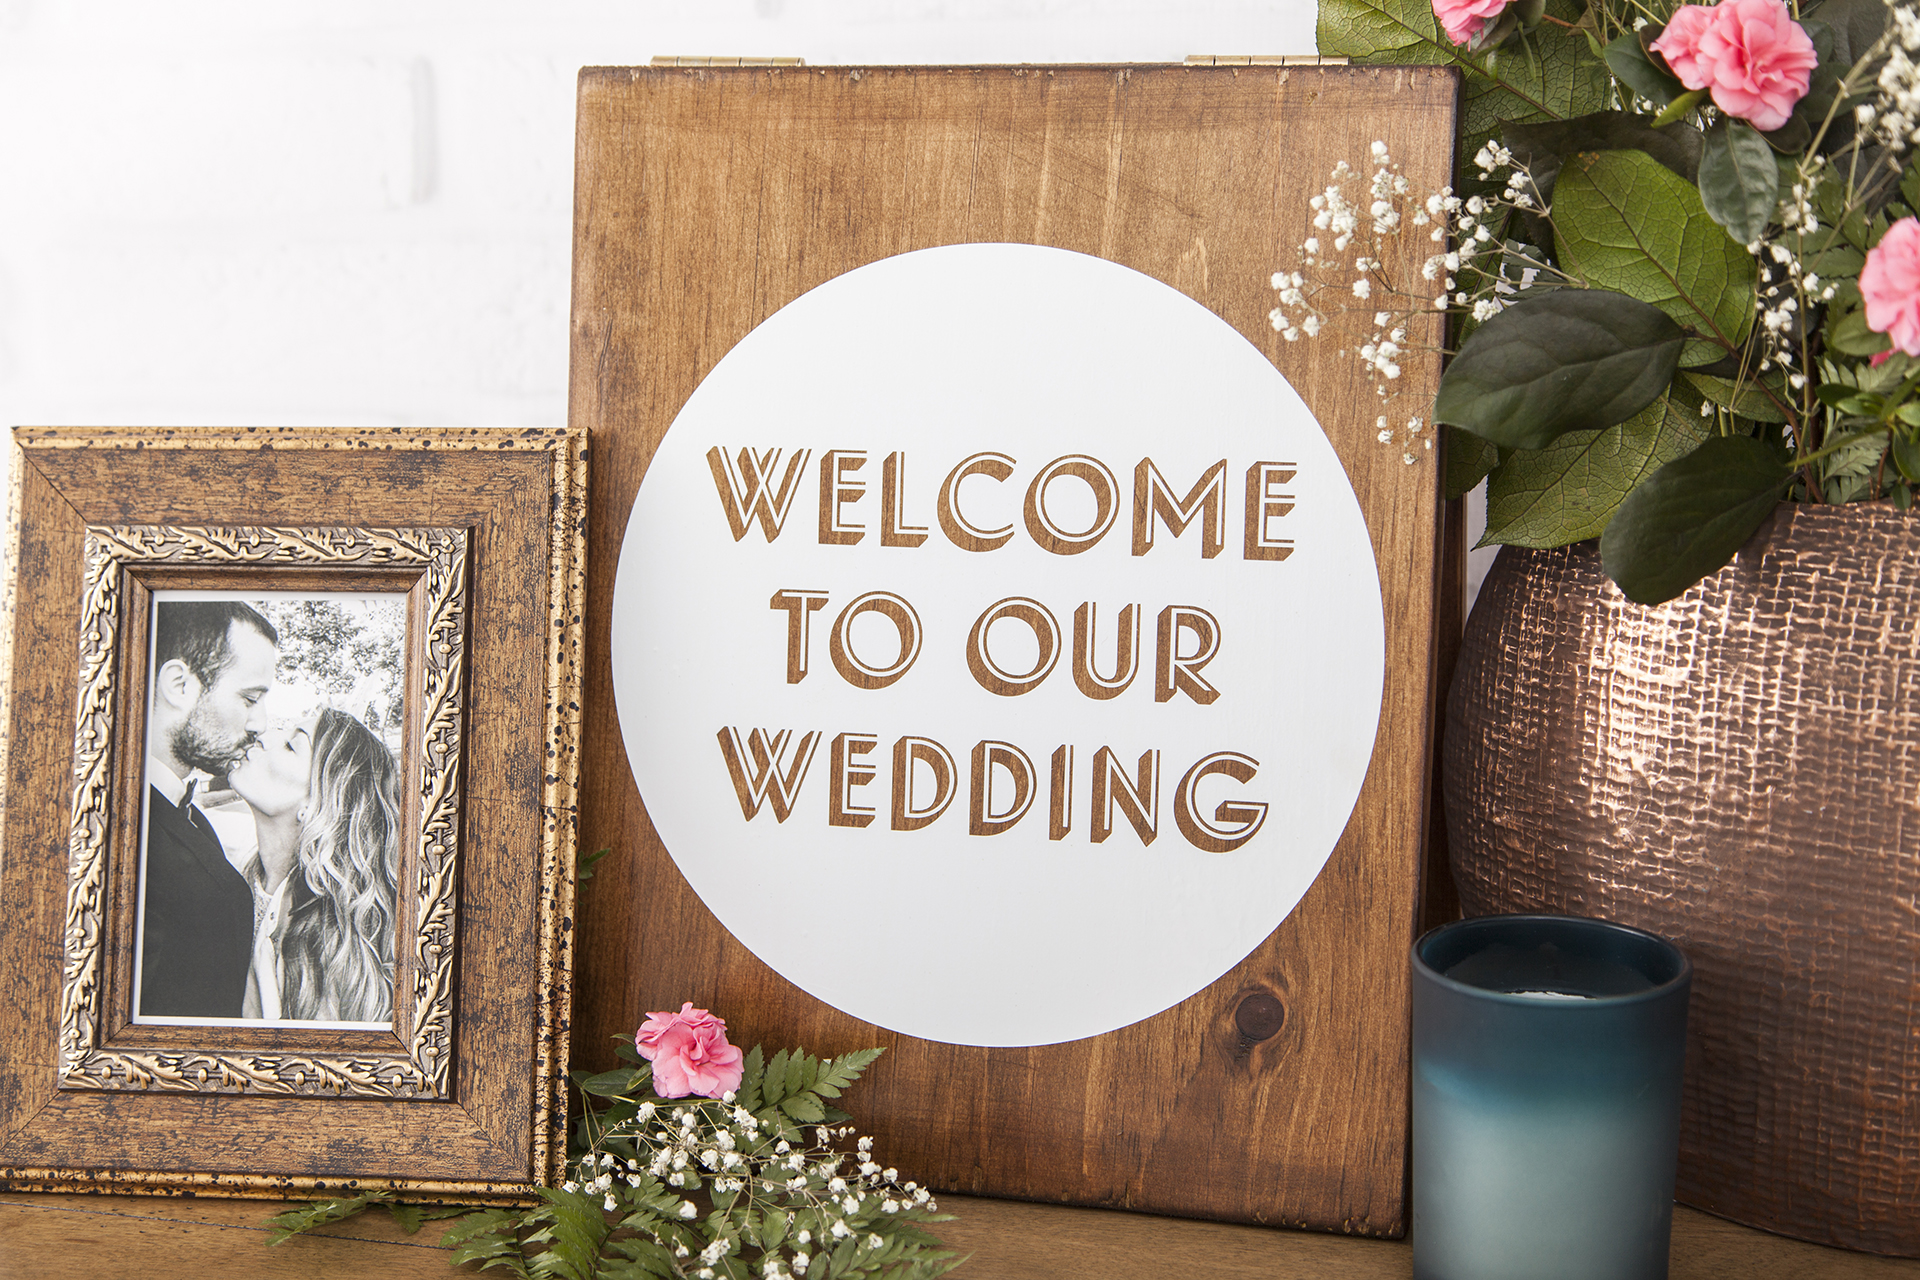 A wooden sign that says "welcome to our wedding" inside a white circle